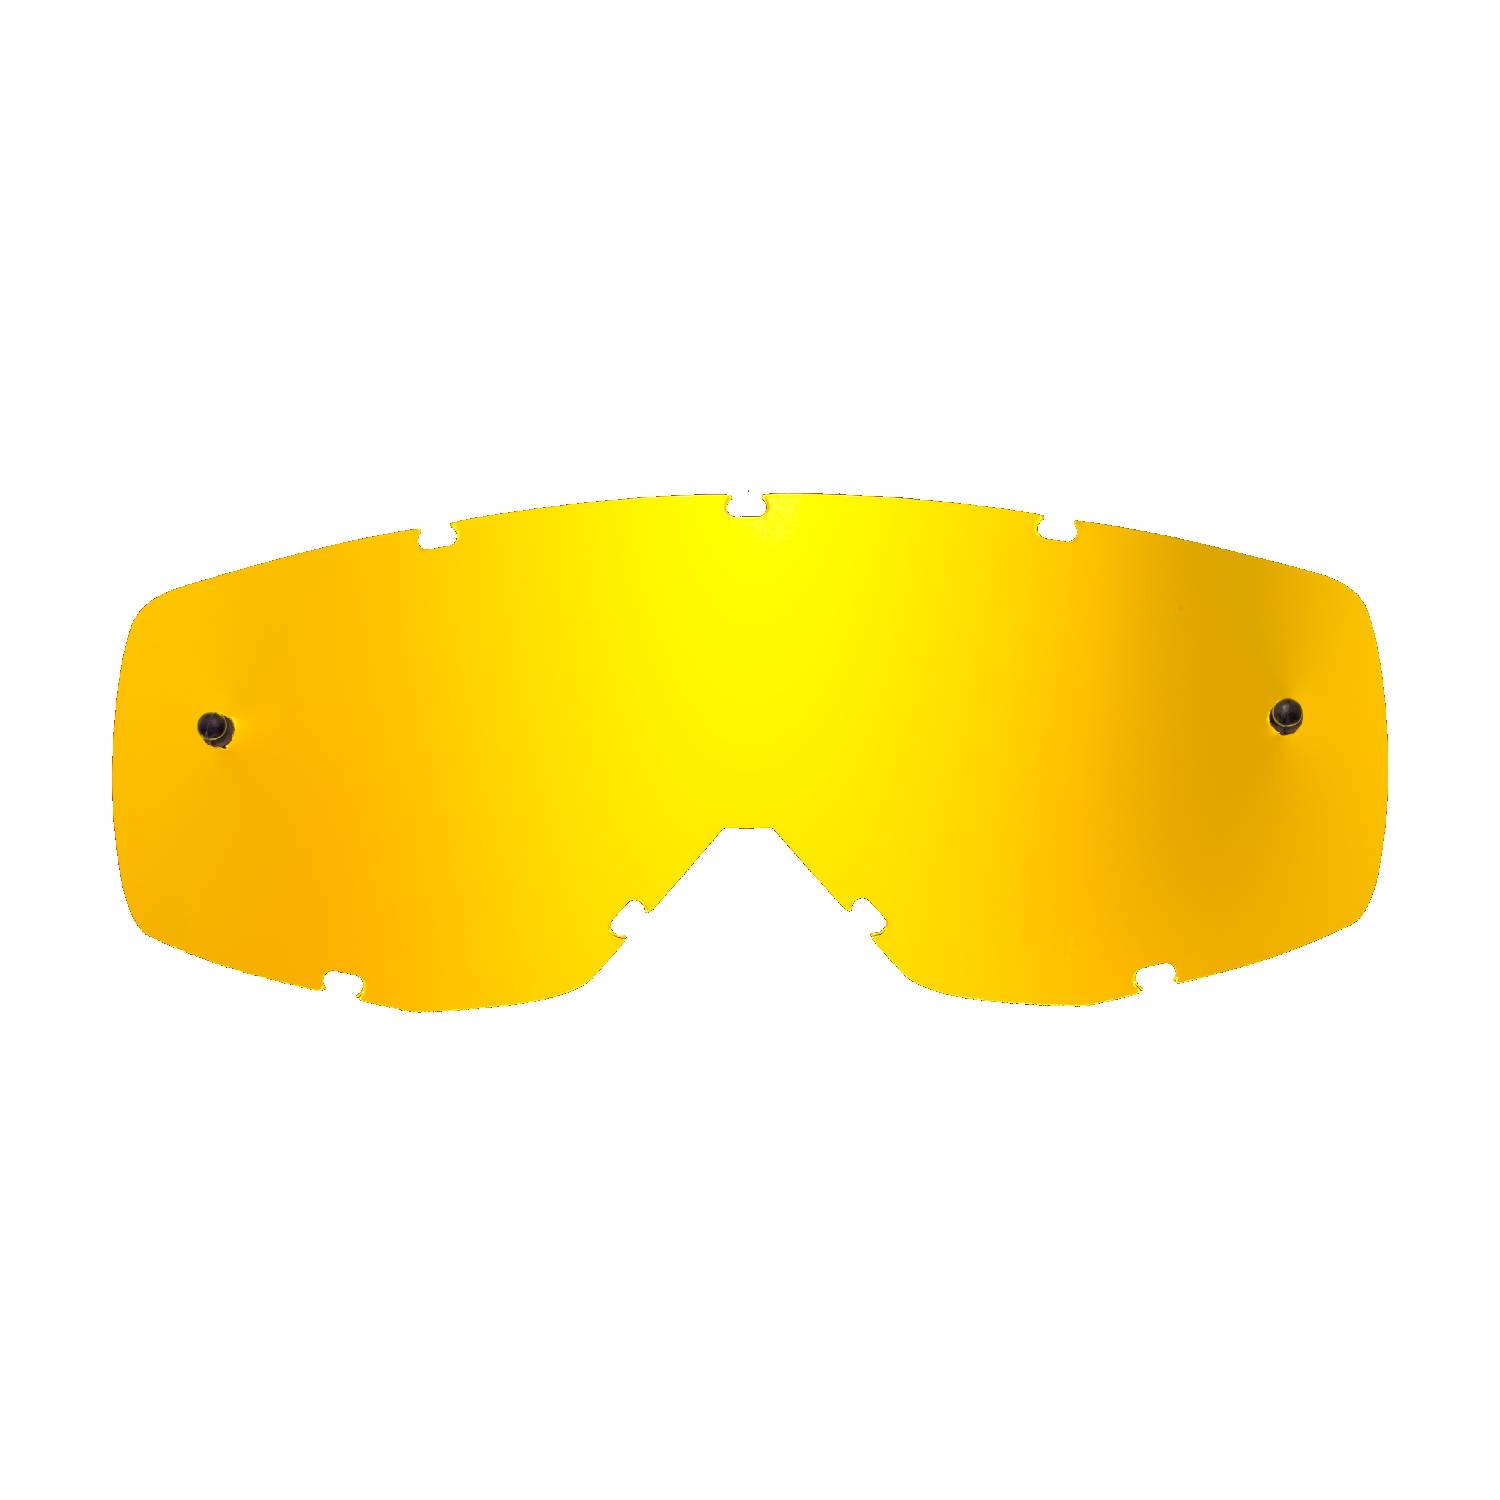 gold-toned mirrored replacement lenses for goggles compatible for Scott Hustle/ Primal / Tyrant / Split goggle